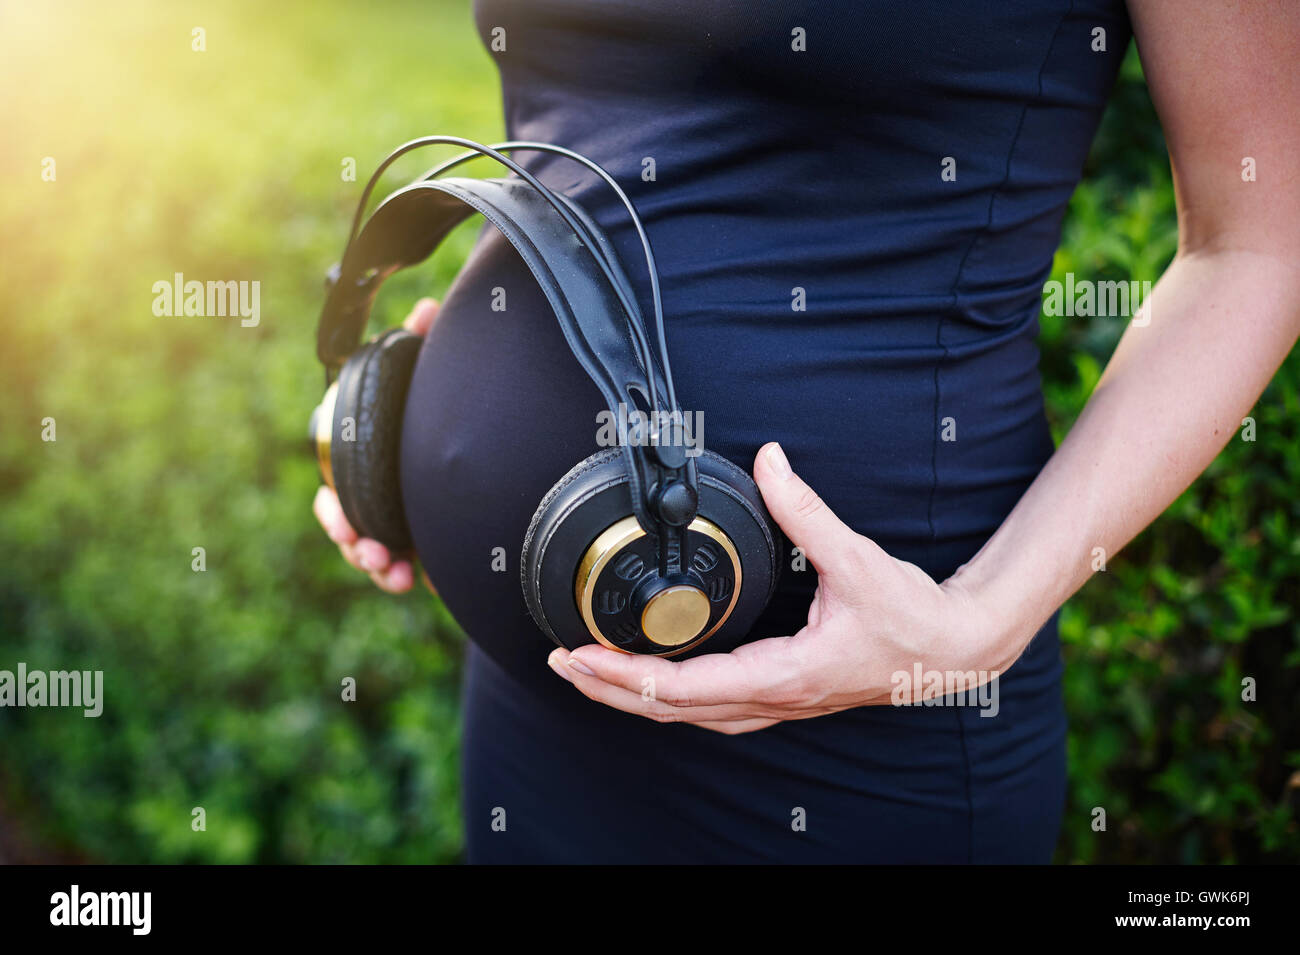 Pregnant woman holding headphones on her stomach Stock Photo